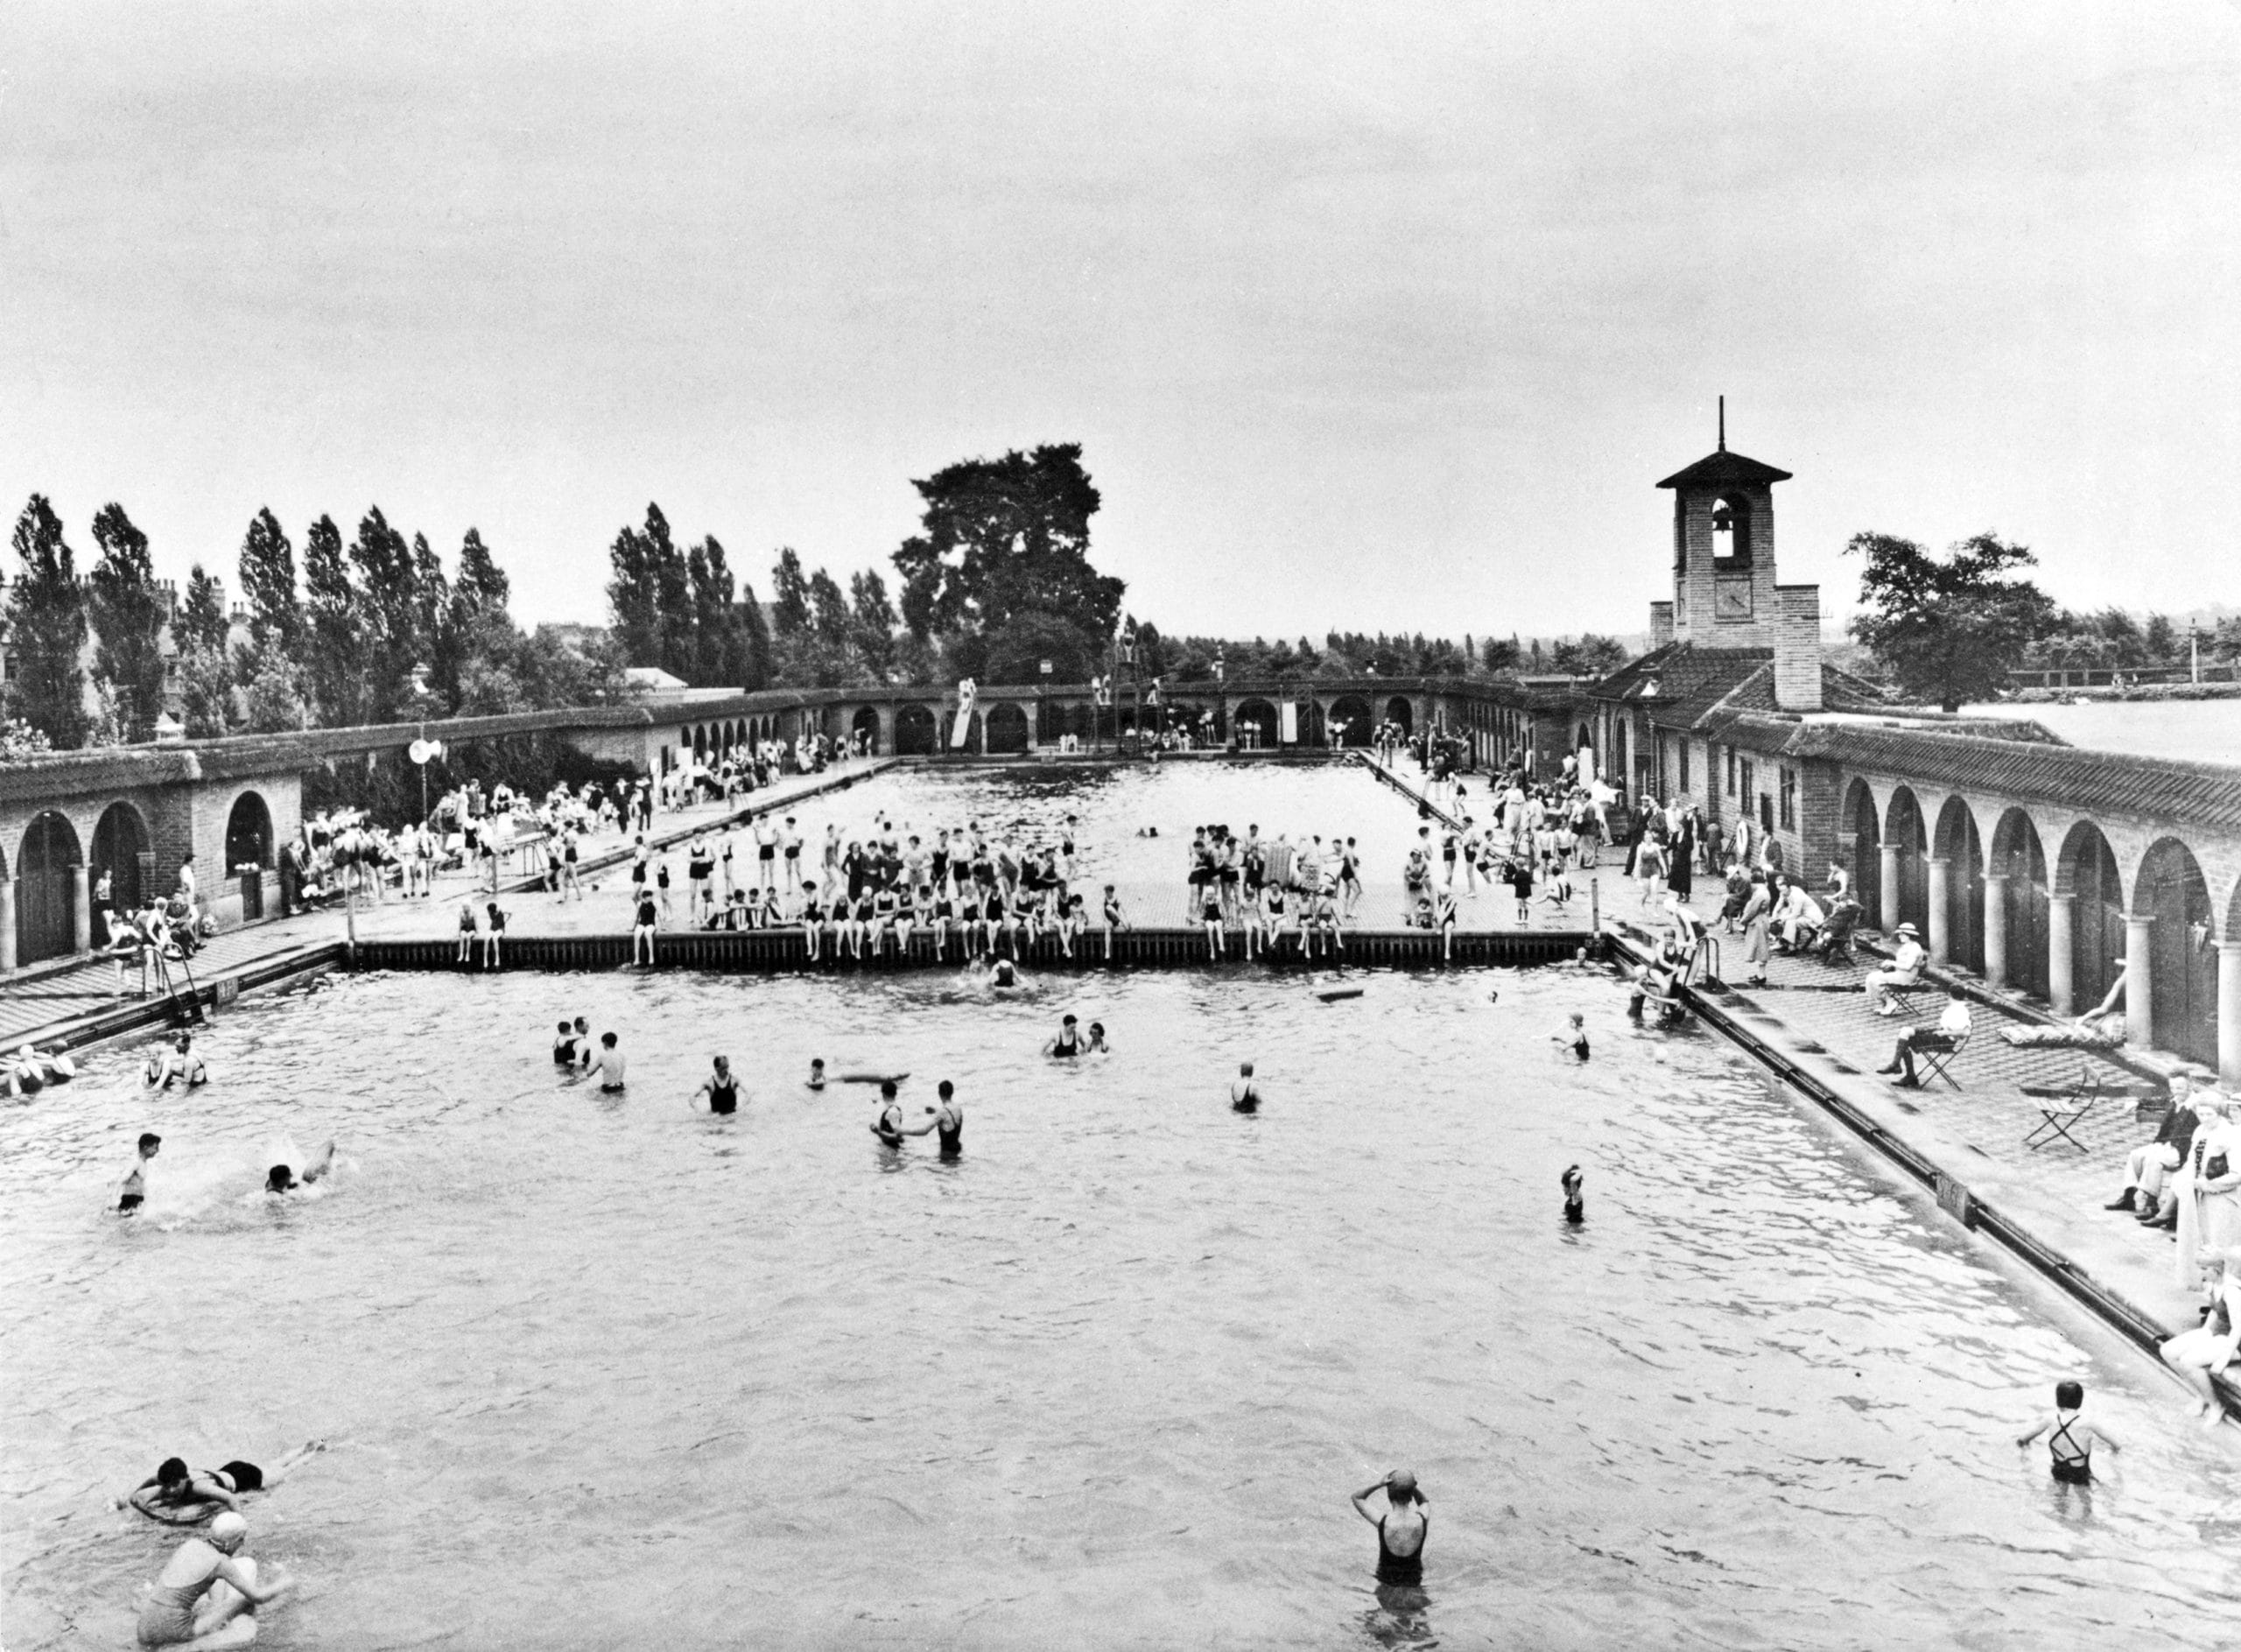 A black and white photograph of an outdoor swimming pool on the site where Lakeside Arts now sits